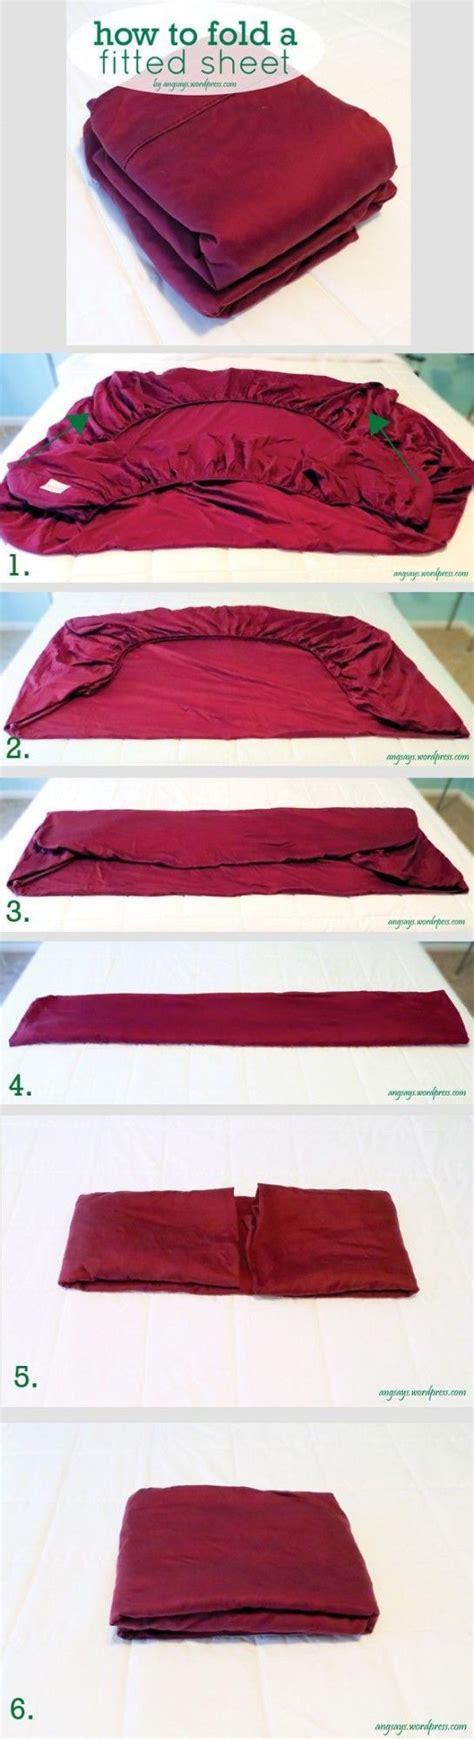 How To Fold A Fitted Sheet Easy Way The Whoot Folding Fitted Sheets Organization Hacks